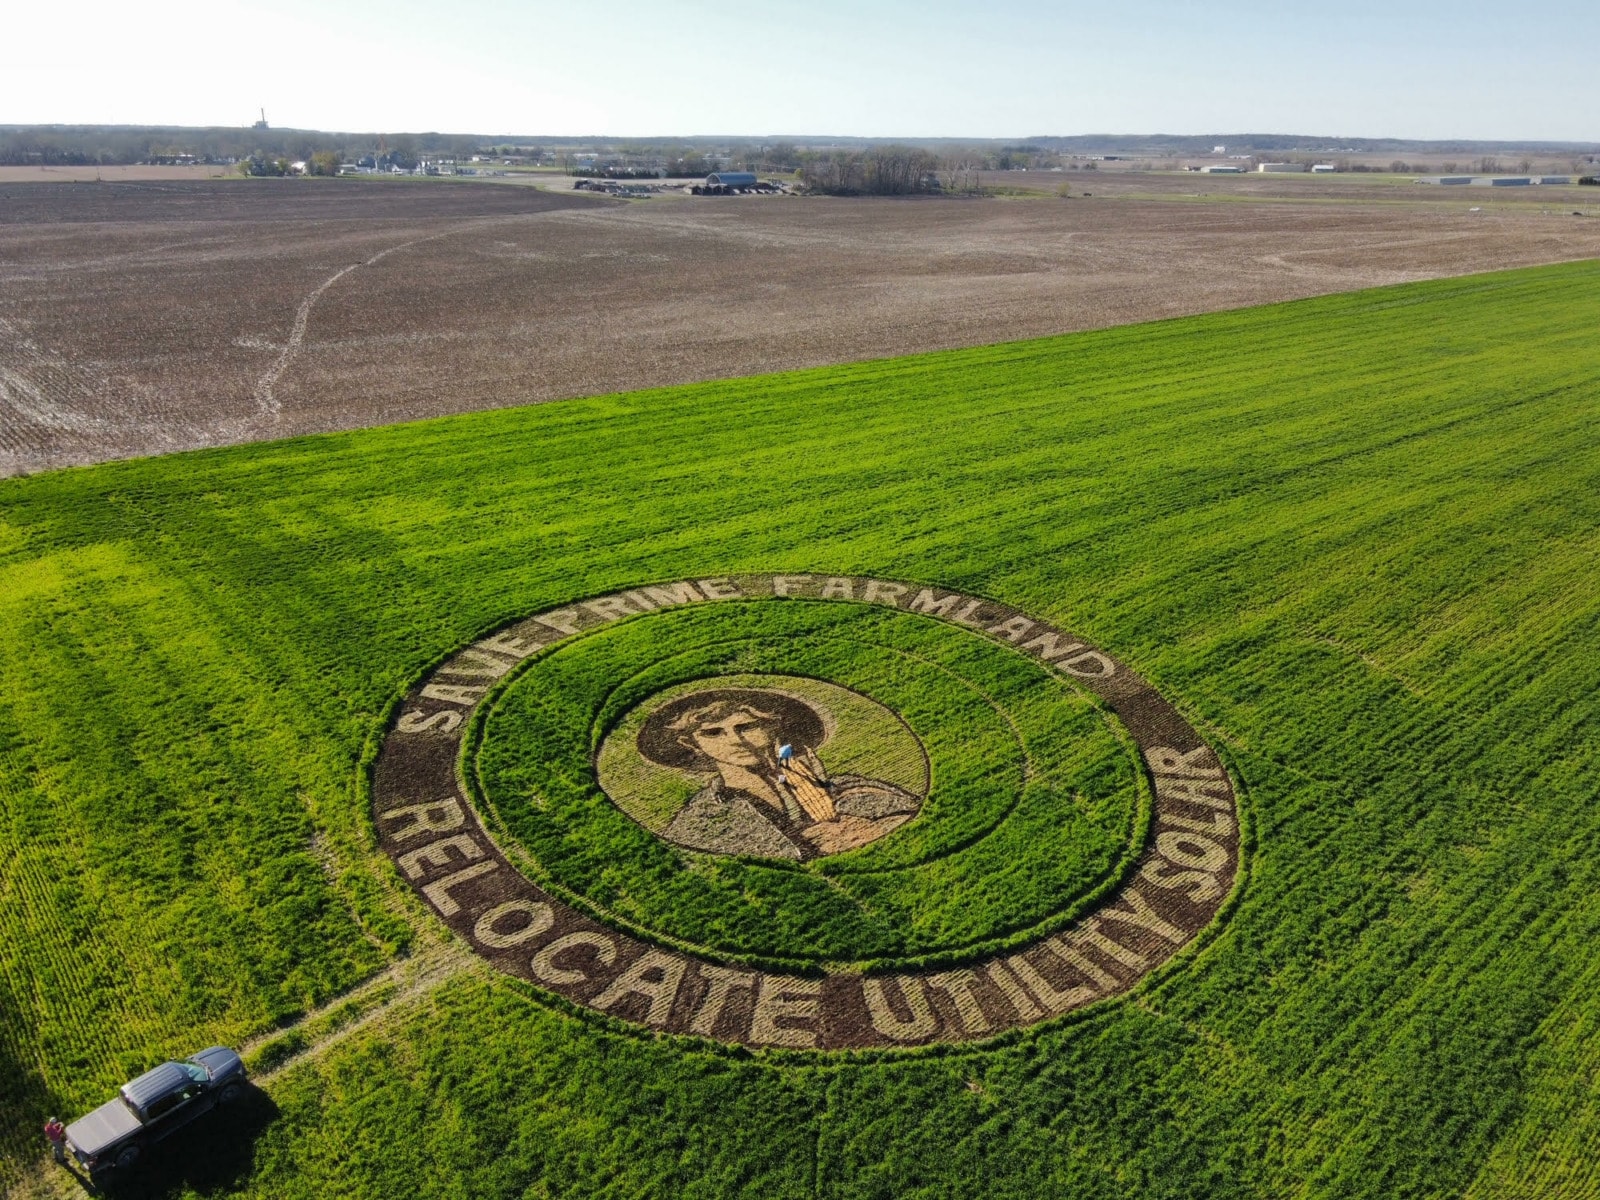 A green field. In the middle of the field is an art piece made of dirt and grass that depicts a young farmer. Around the outside of the circle it reads "Save Prime Soil" "Relocate Utility Soil"